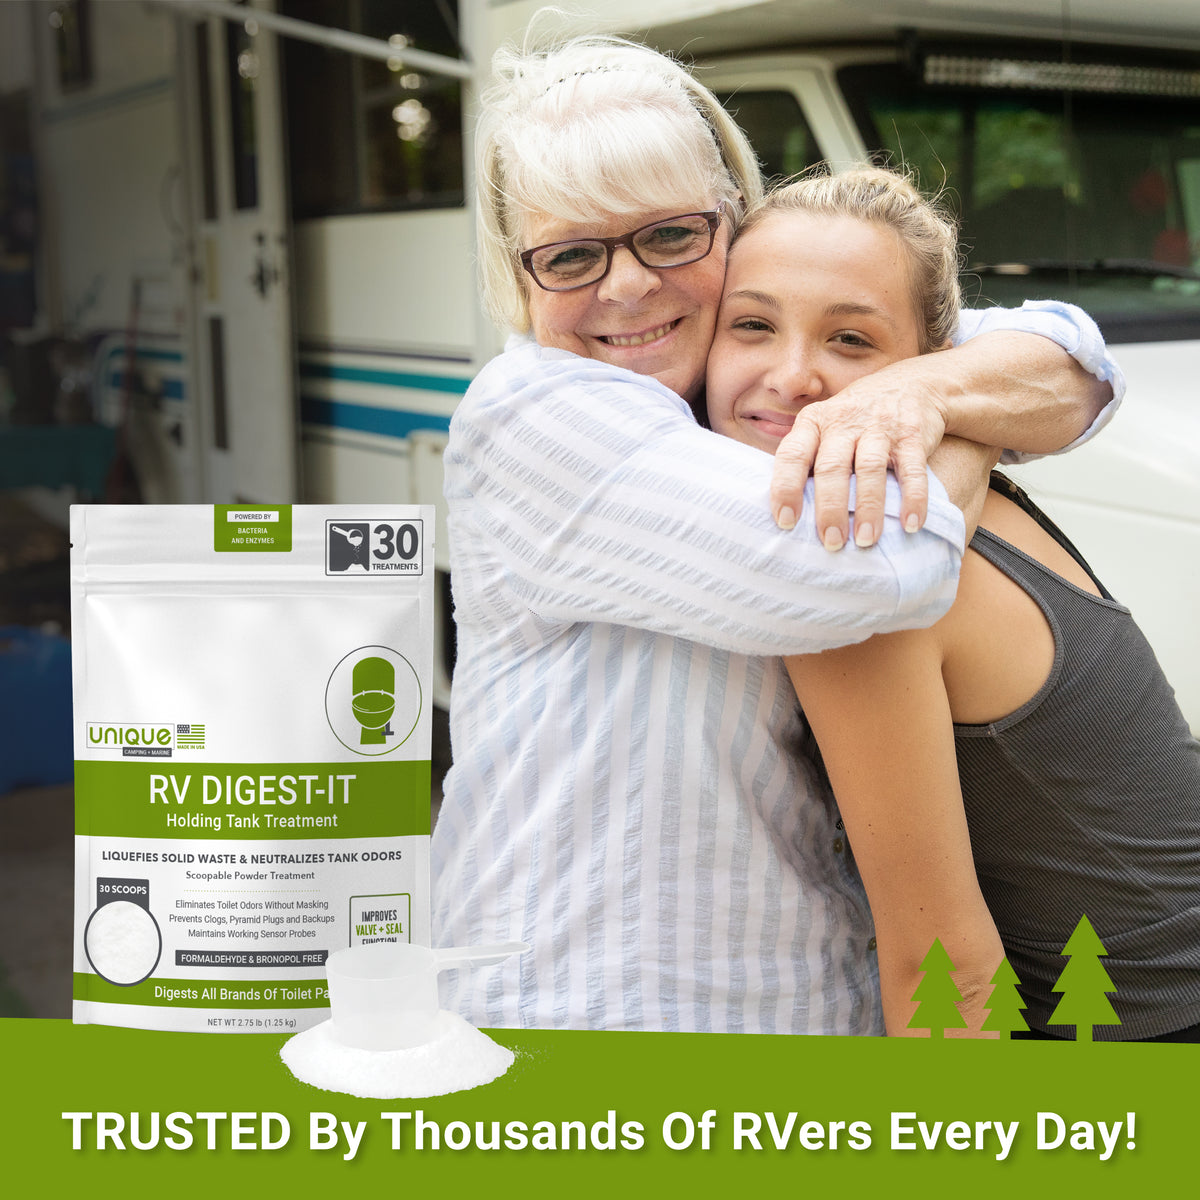 RV Digest-It is trusted by thousands of RVers nationwide! Unique Camping + Marine